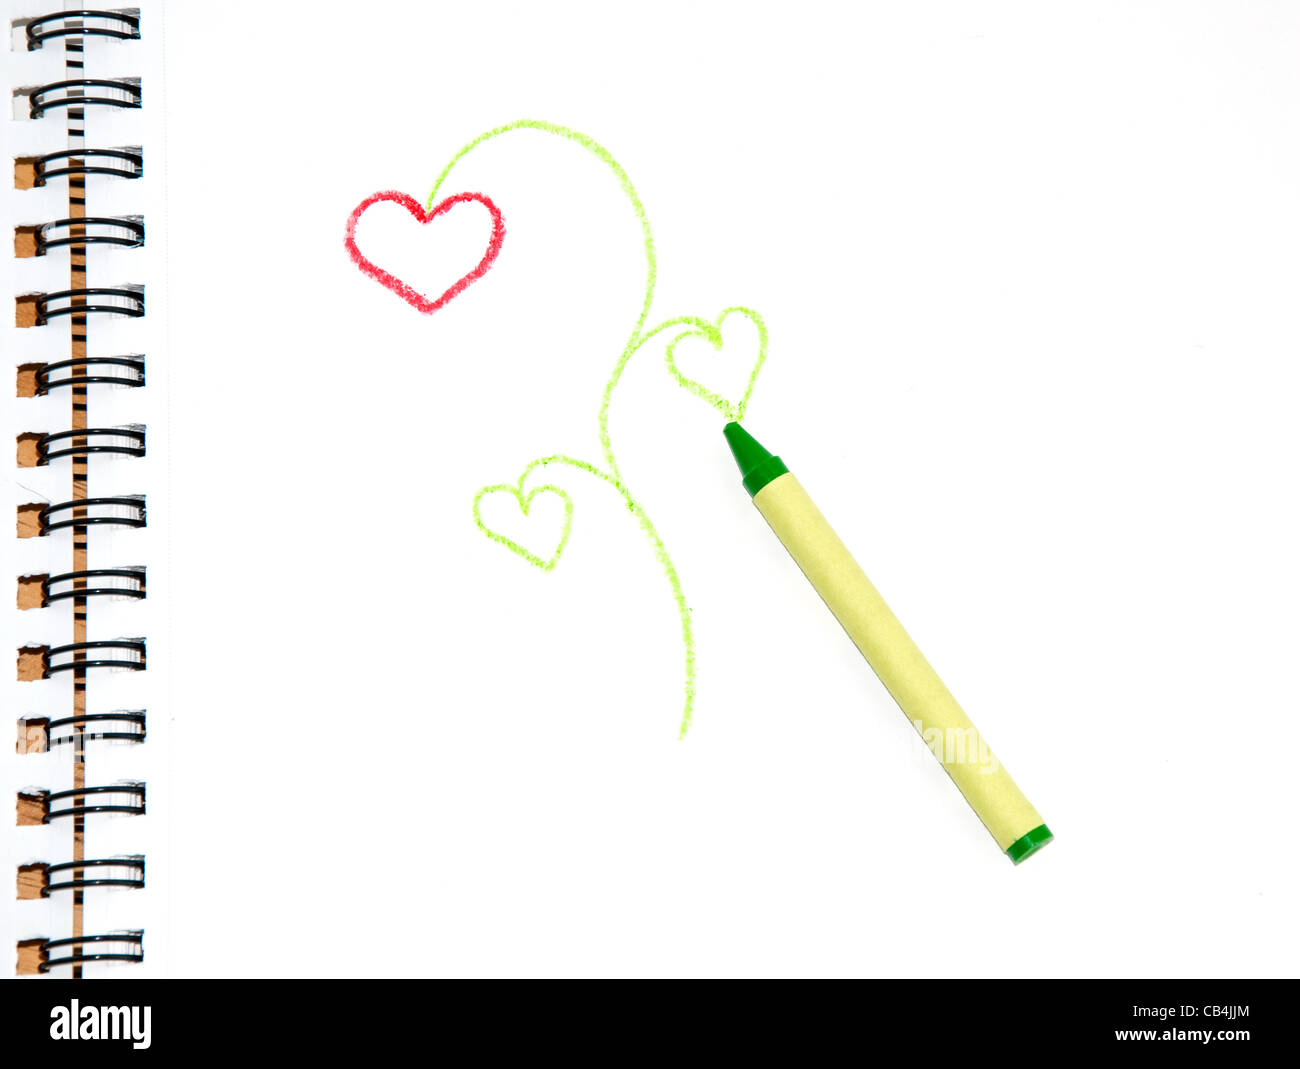 Green crayon on sketch paper with a doodle of a plant with heart shaped flower and leaves Stock Photo